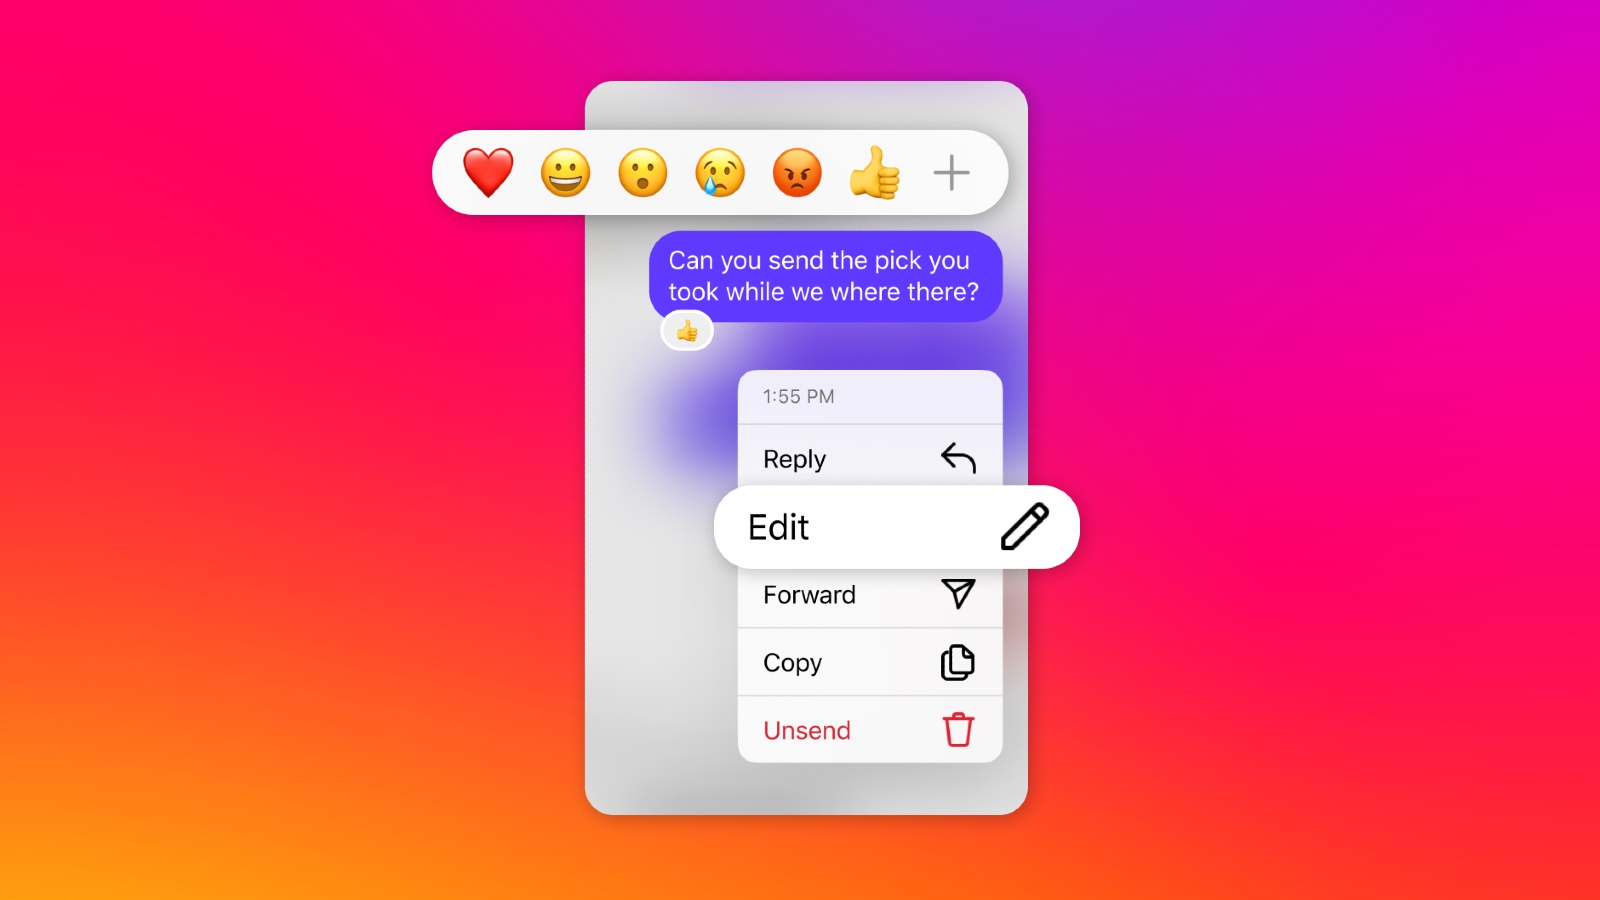 Instagram introduces 15-minute edit window for DMs